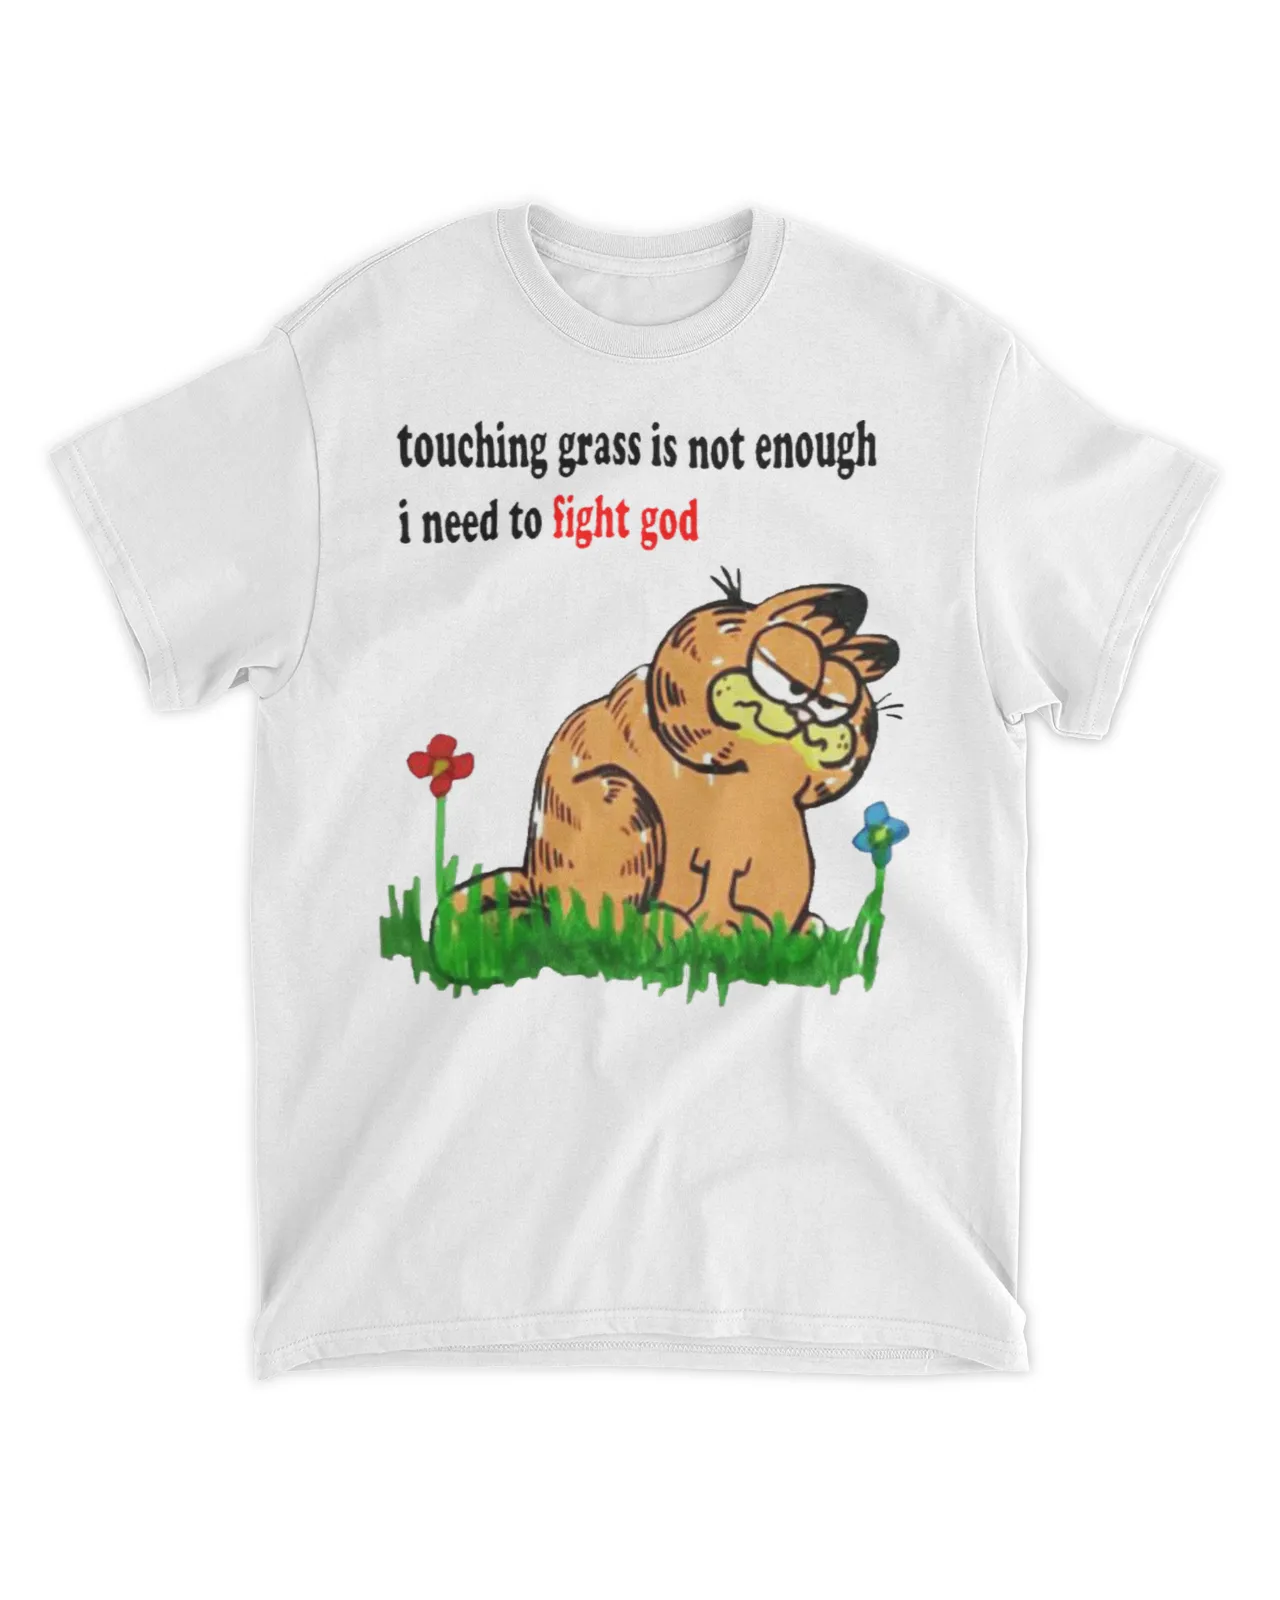  Touching grass is not enough I need to fight god shirt